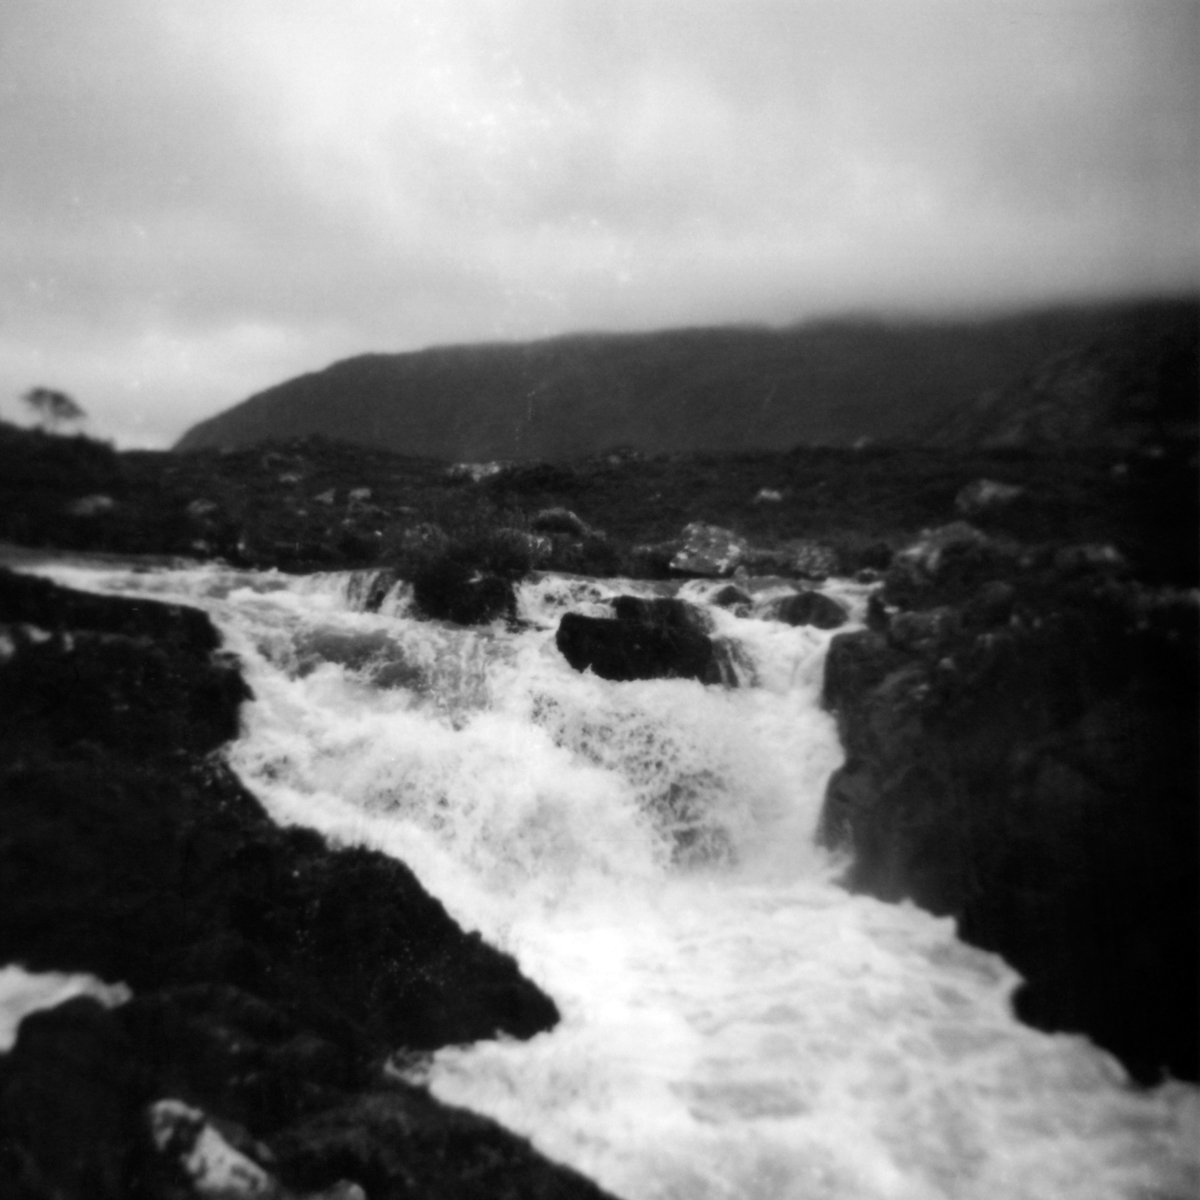 Torrent 2 (Falls Of Balgy) - Unmounted (24x24in) by Justice Hyde